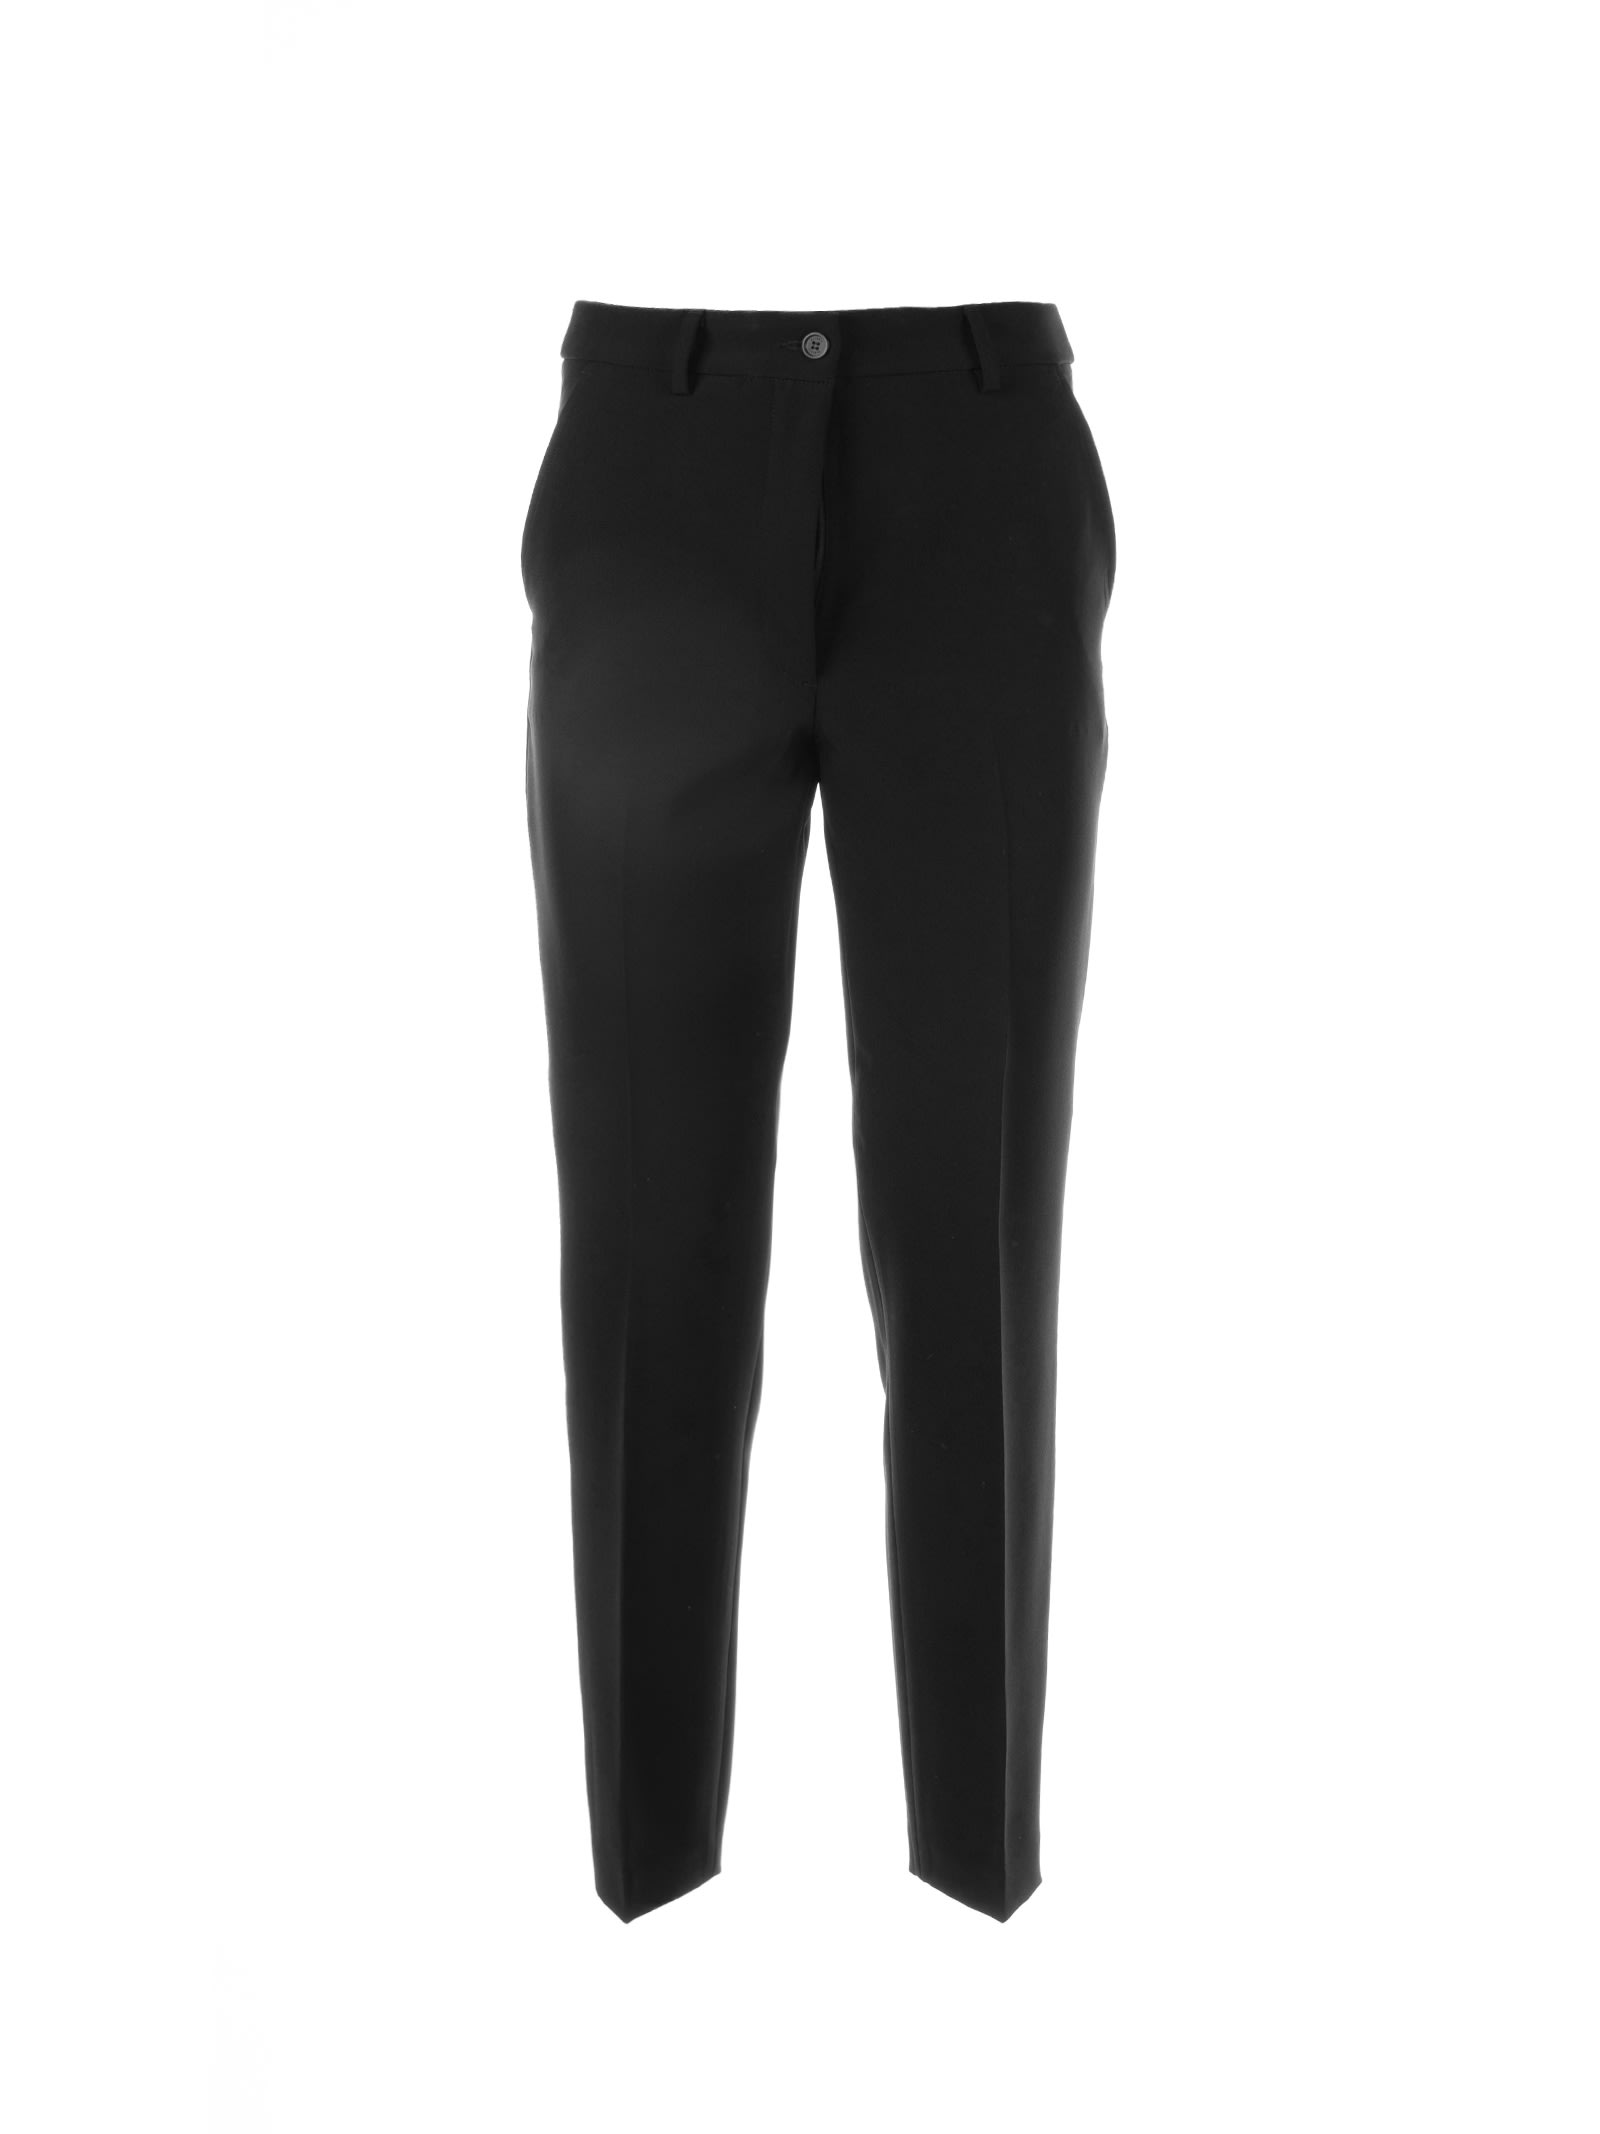 Black Trousers In Technical Fabric